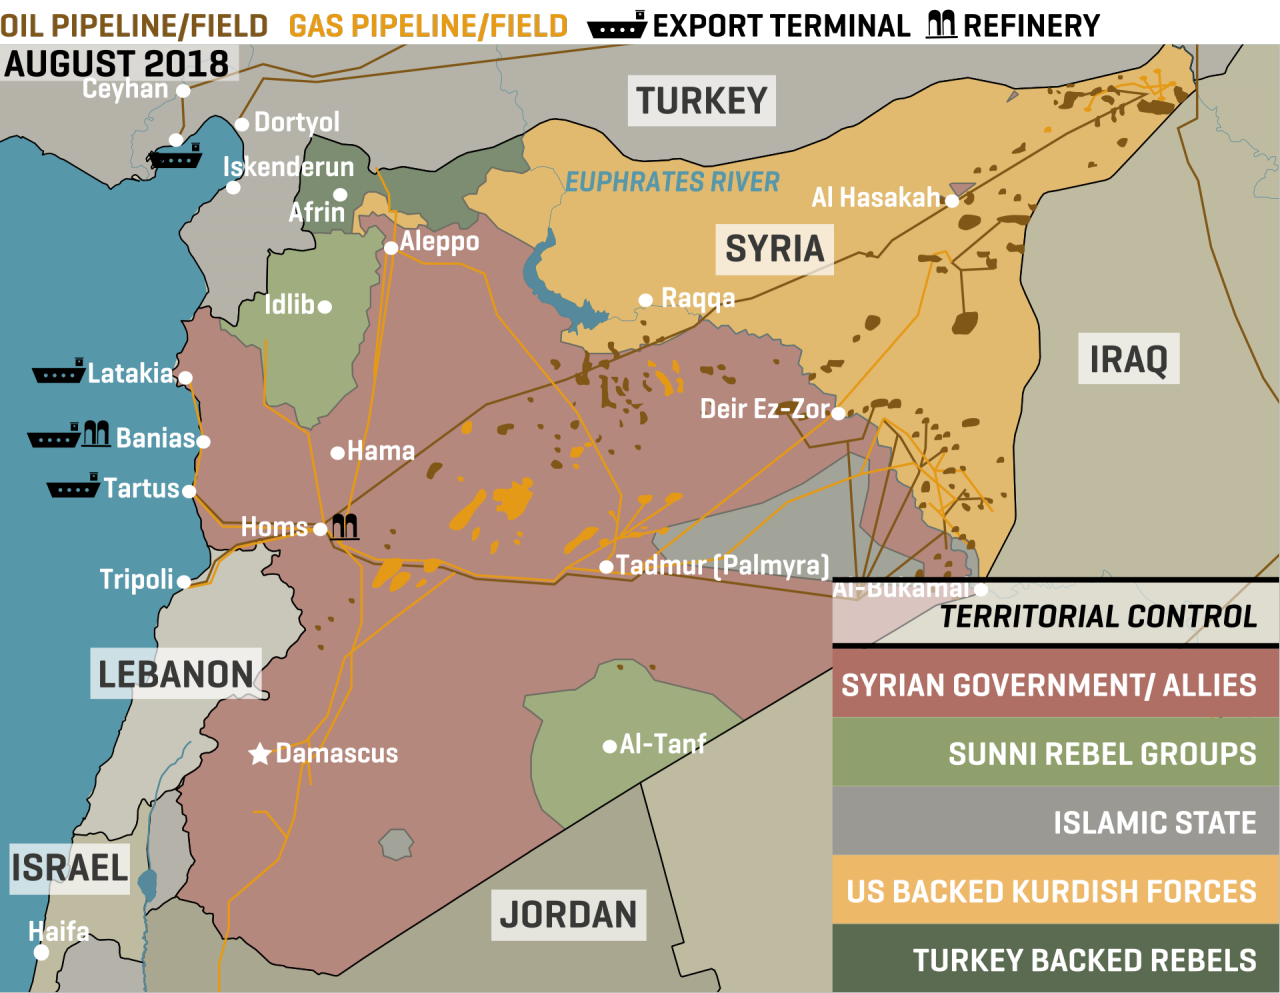 Syria’s Political Divisions & Energy Infrastructure Now